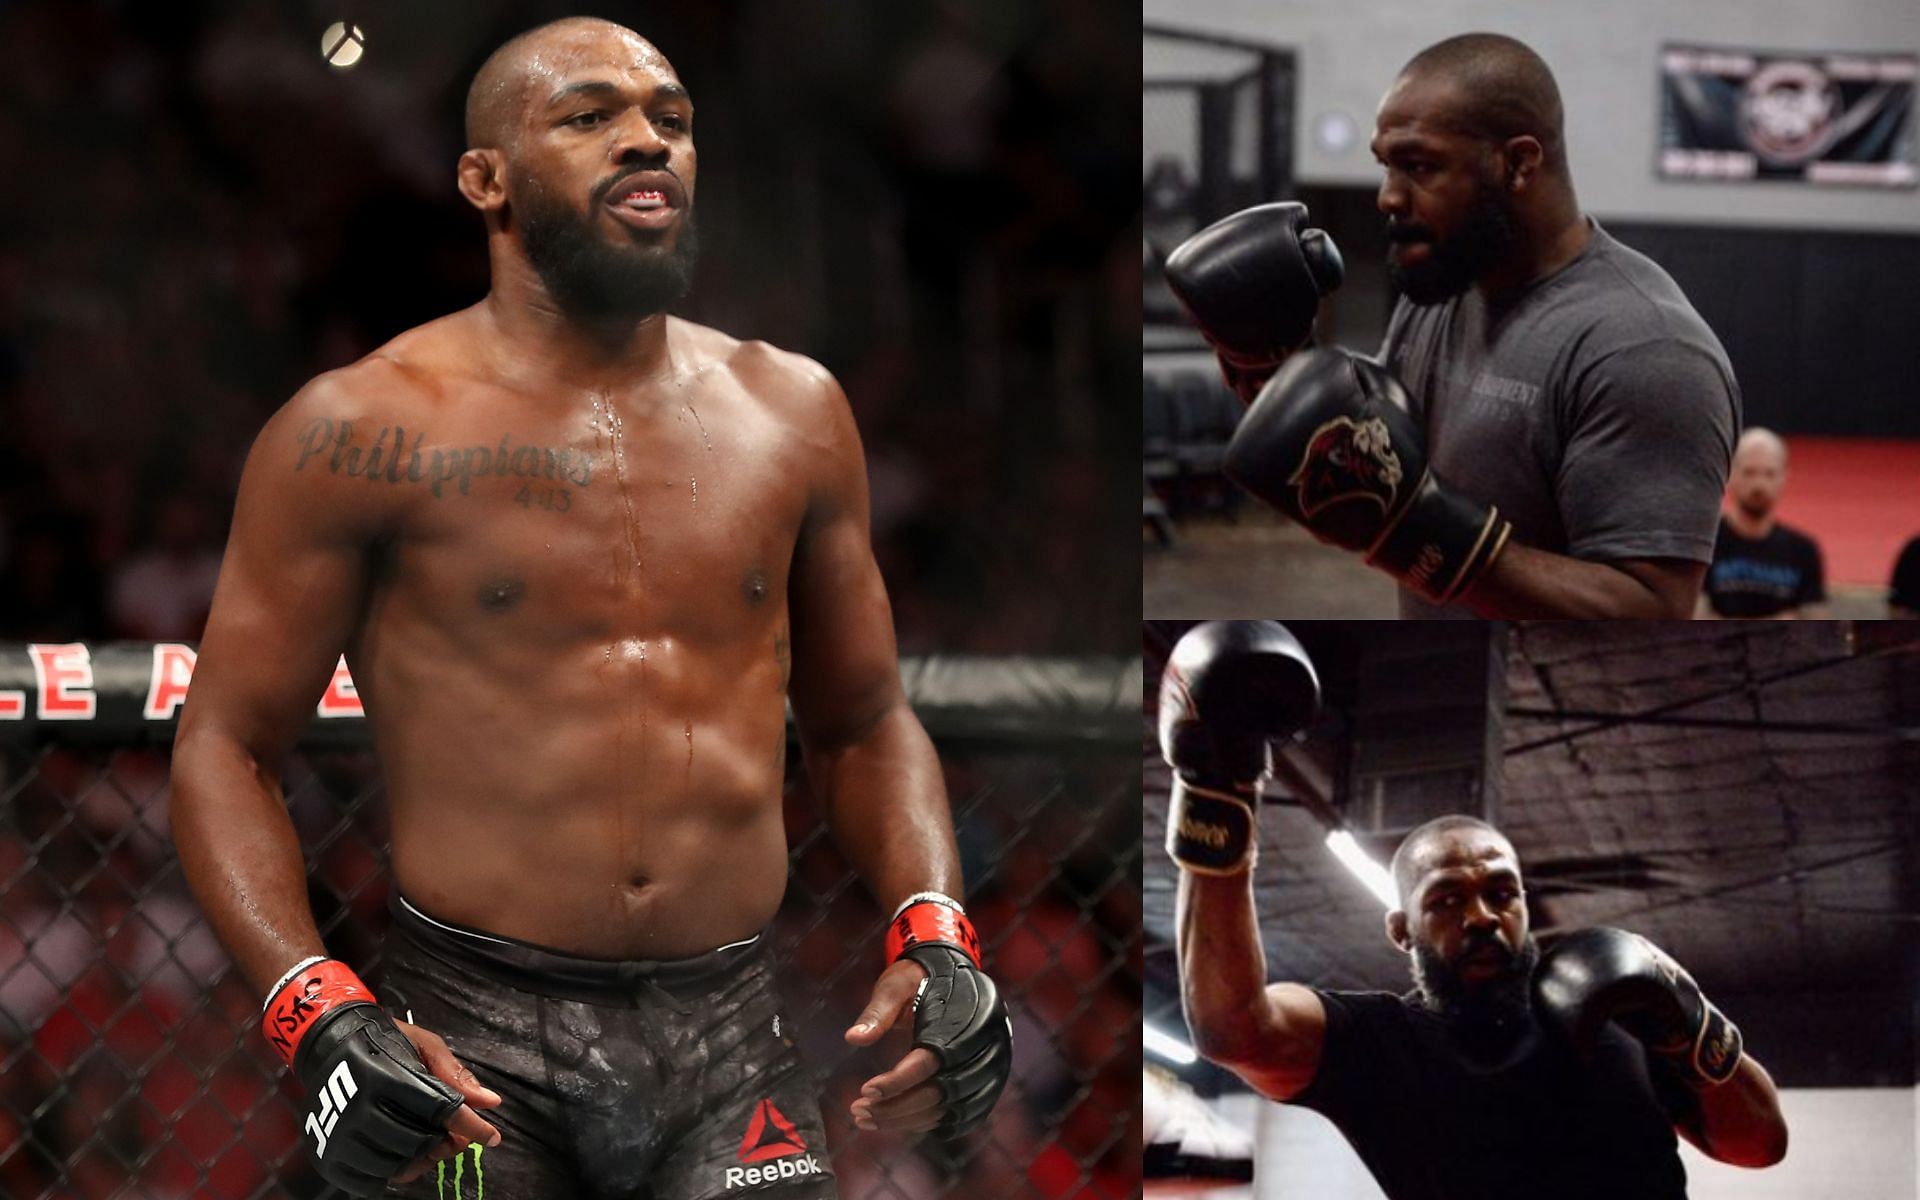 Jon Jones and his recent training images (right). [Images courtesy: left image from Getty Images and right images from Instagram @jonnybones]